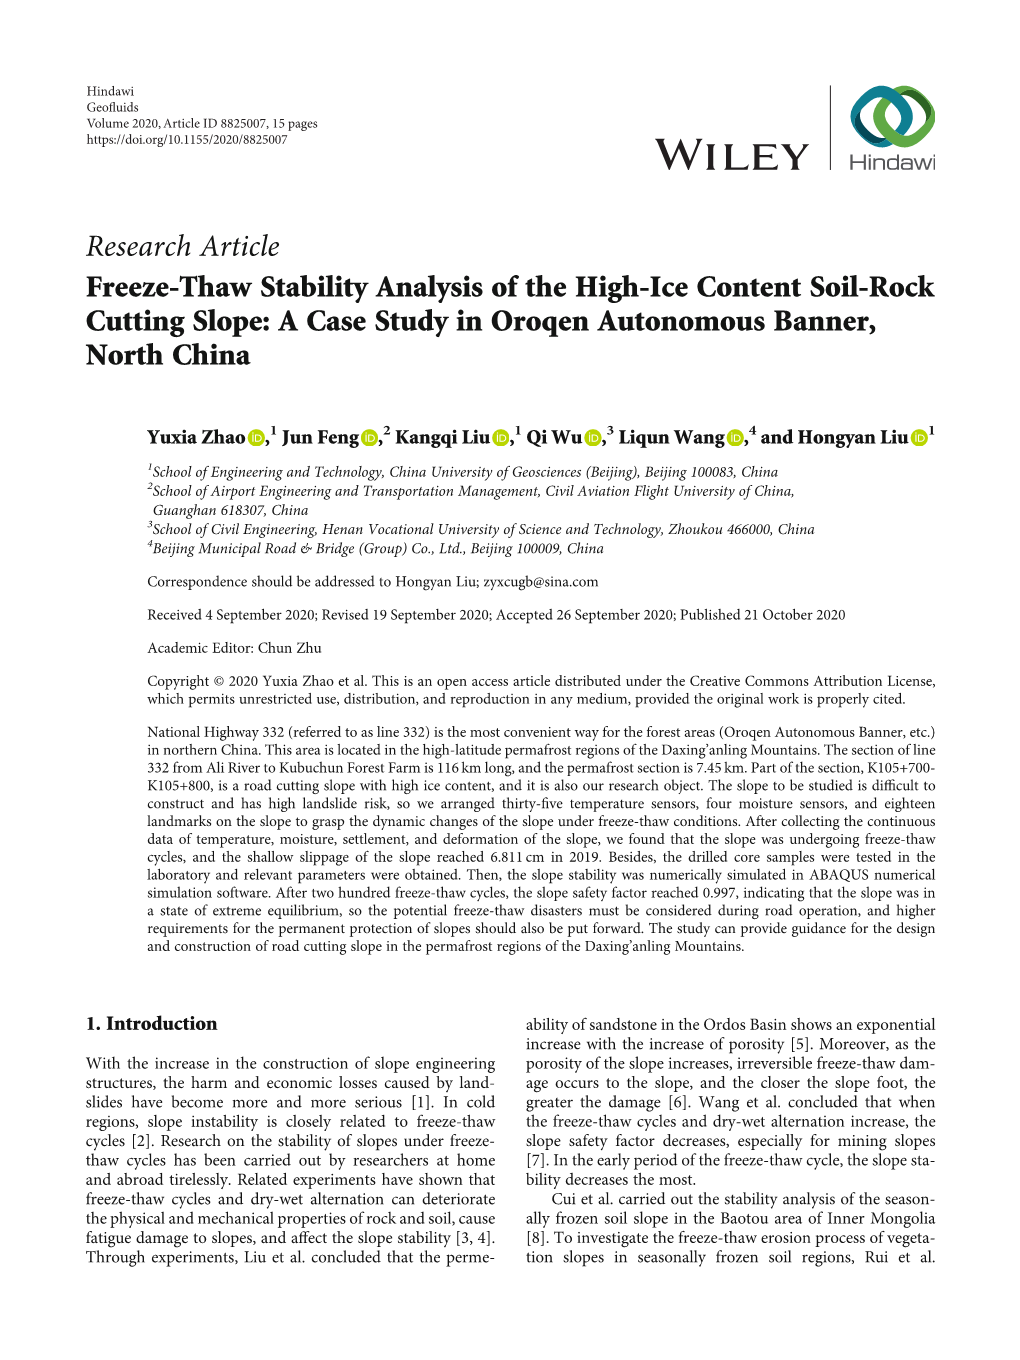 Freeze-Thaw Stability Analysis of the High-Ice Content Soil-Rock Cutting Slope: a Case Study in Oroqen Autonomous Banner, North China